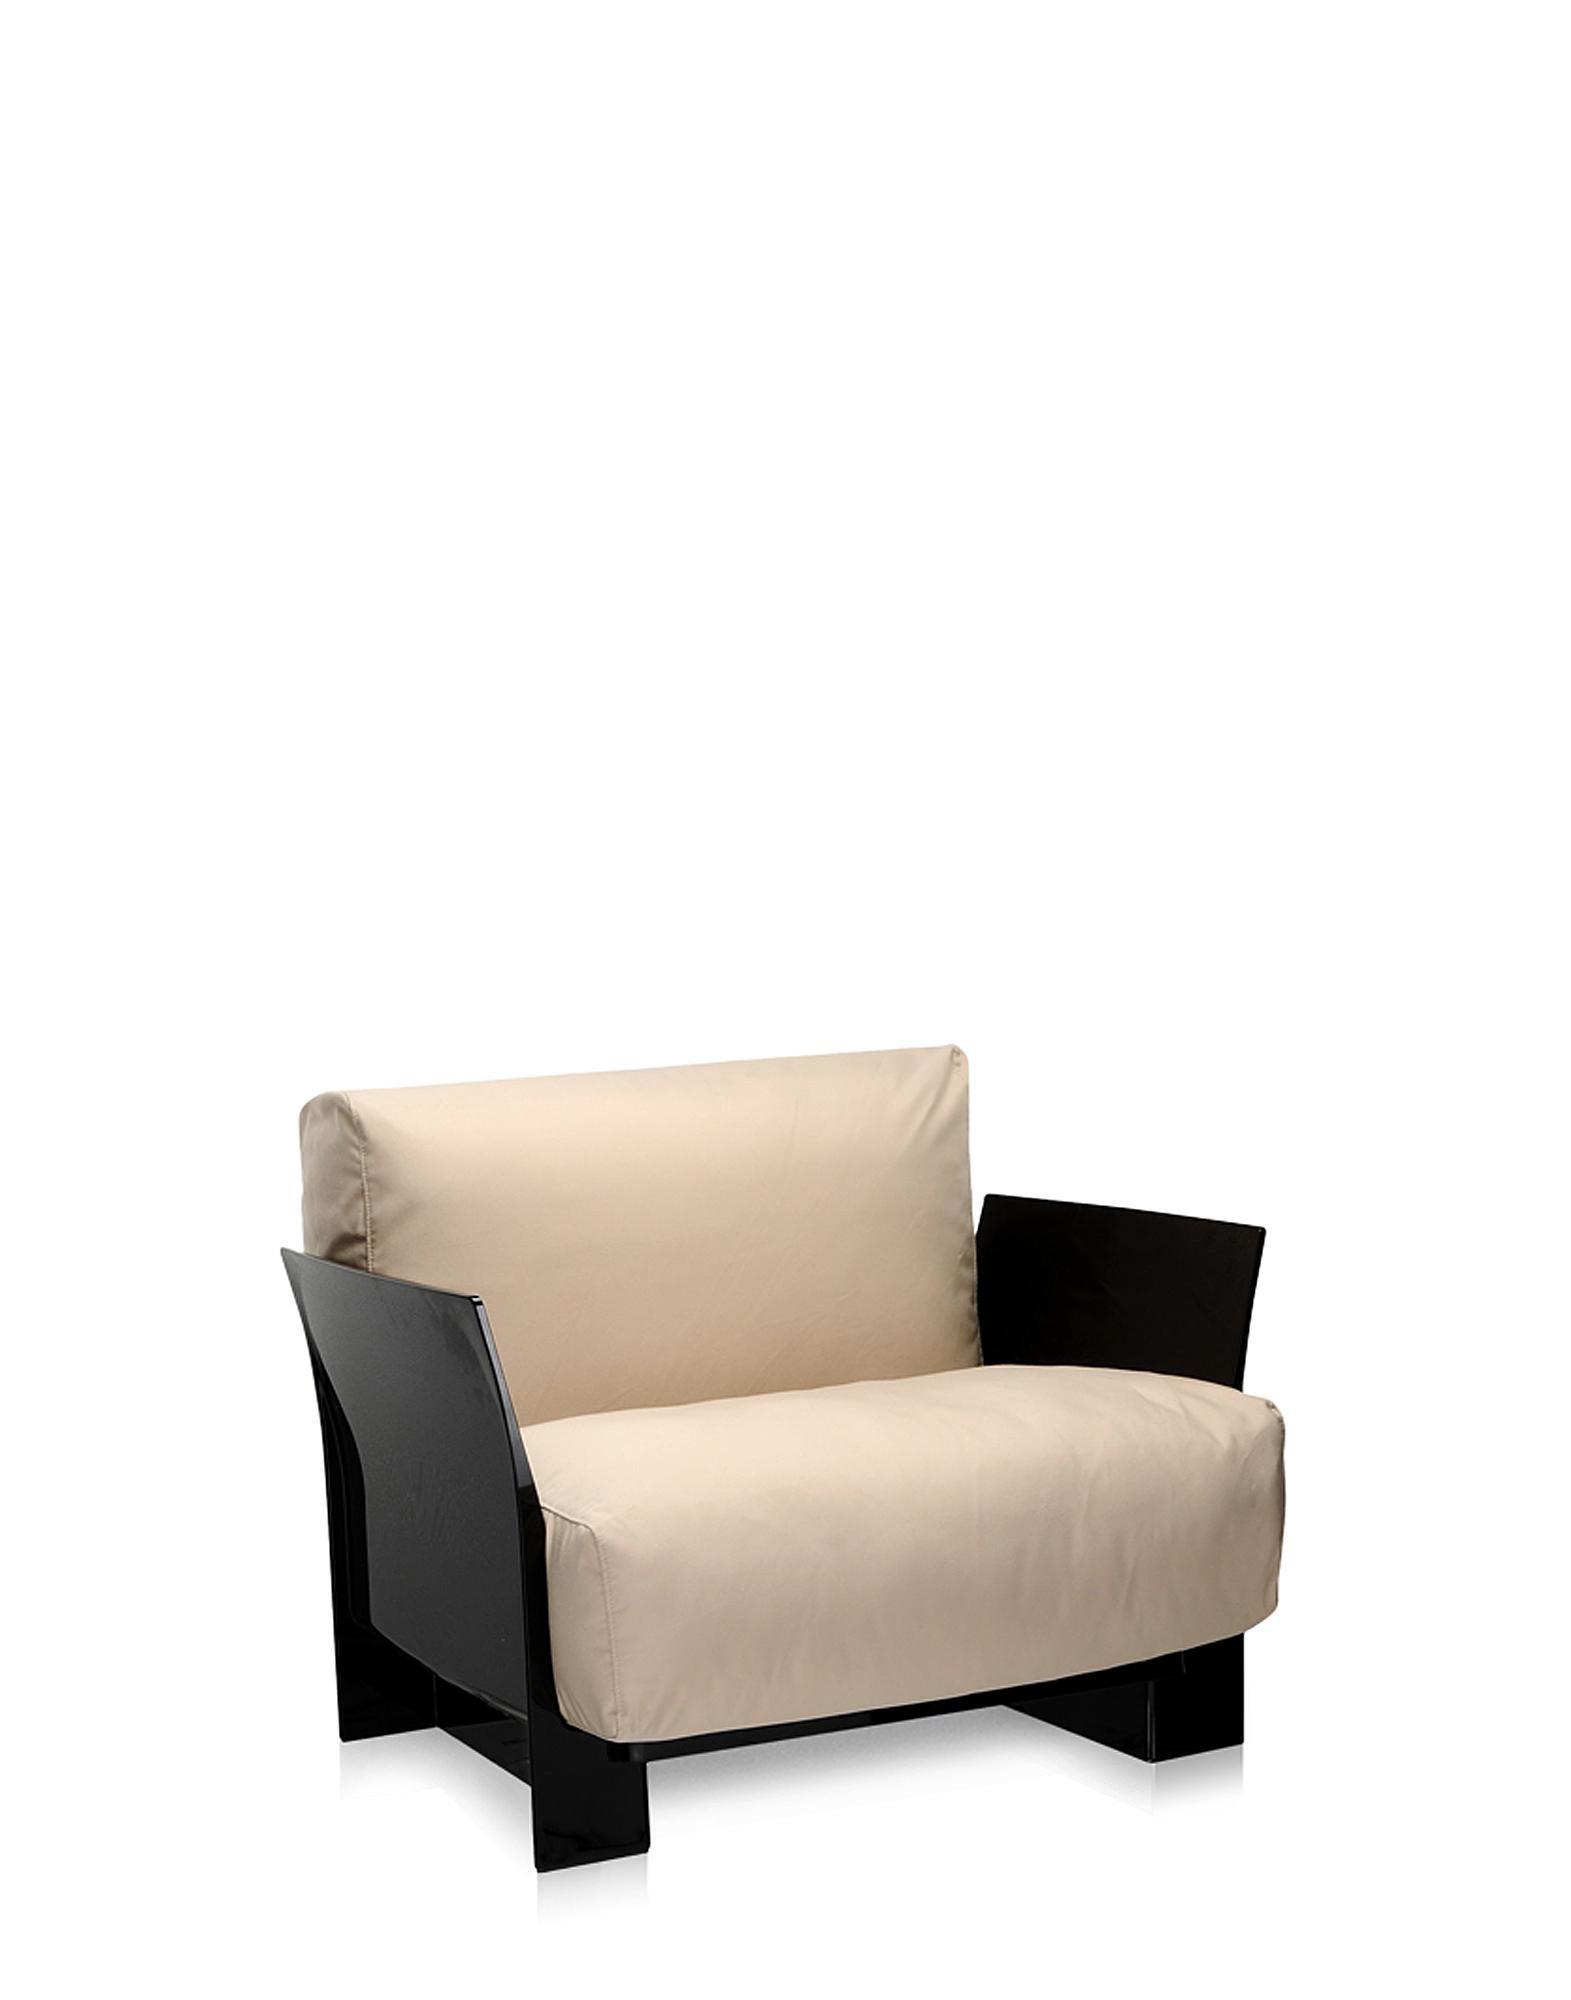 Modern Kartell Pop Outdoor Armchair in Dove by Piero Lissoni For Sale